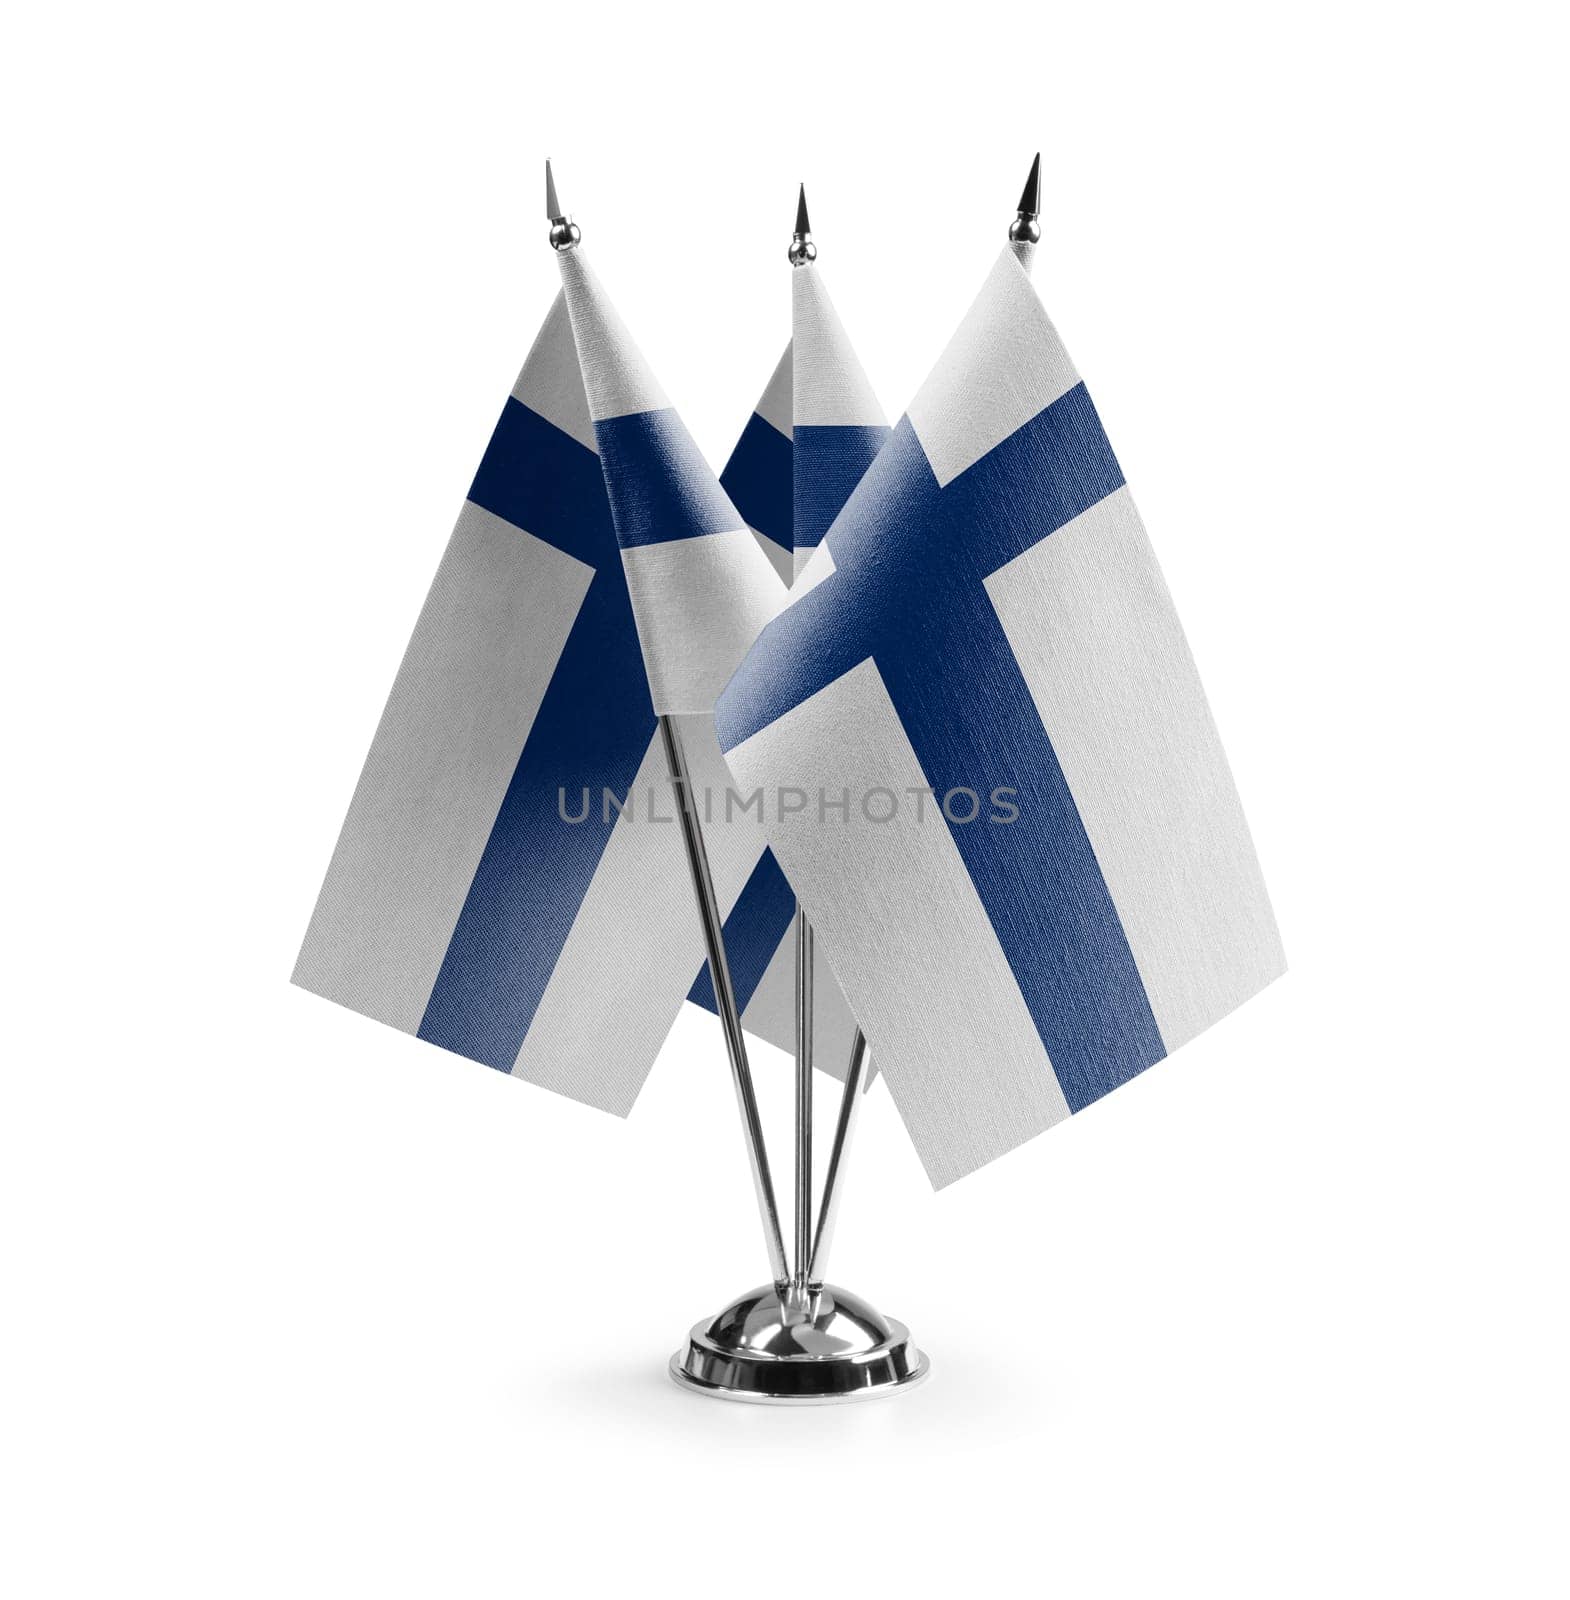 Small national flags of the Finland on a white background.